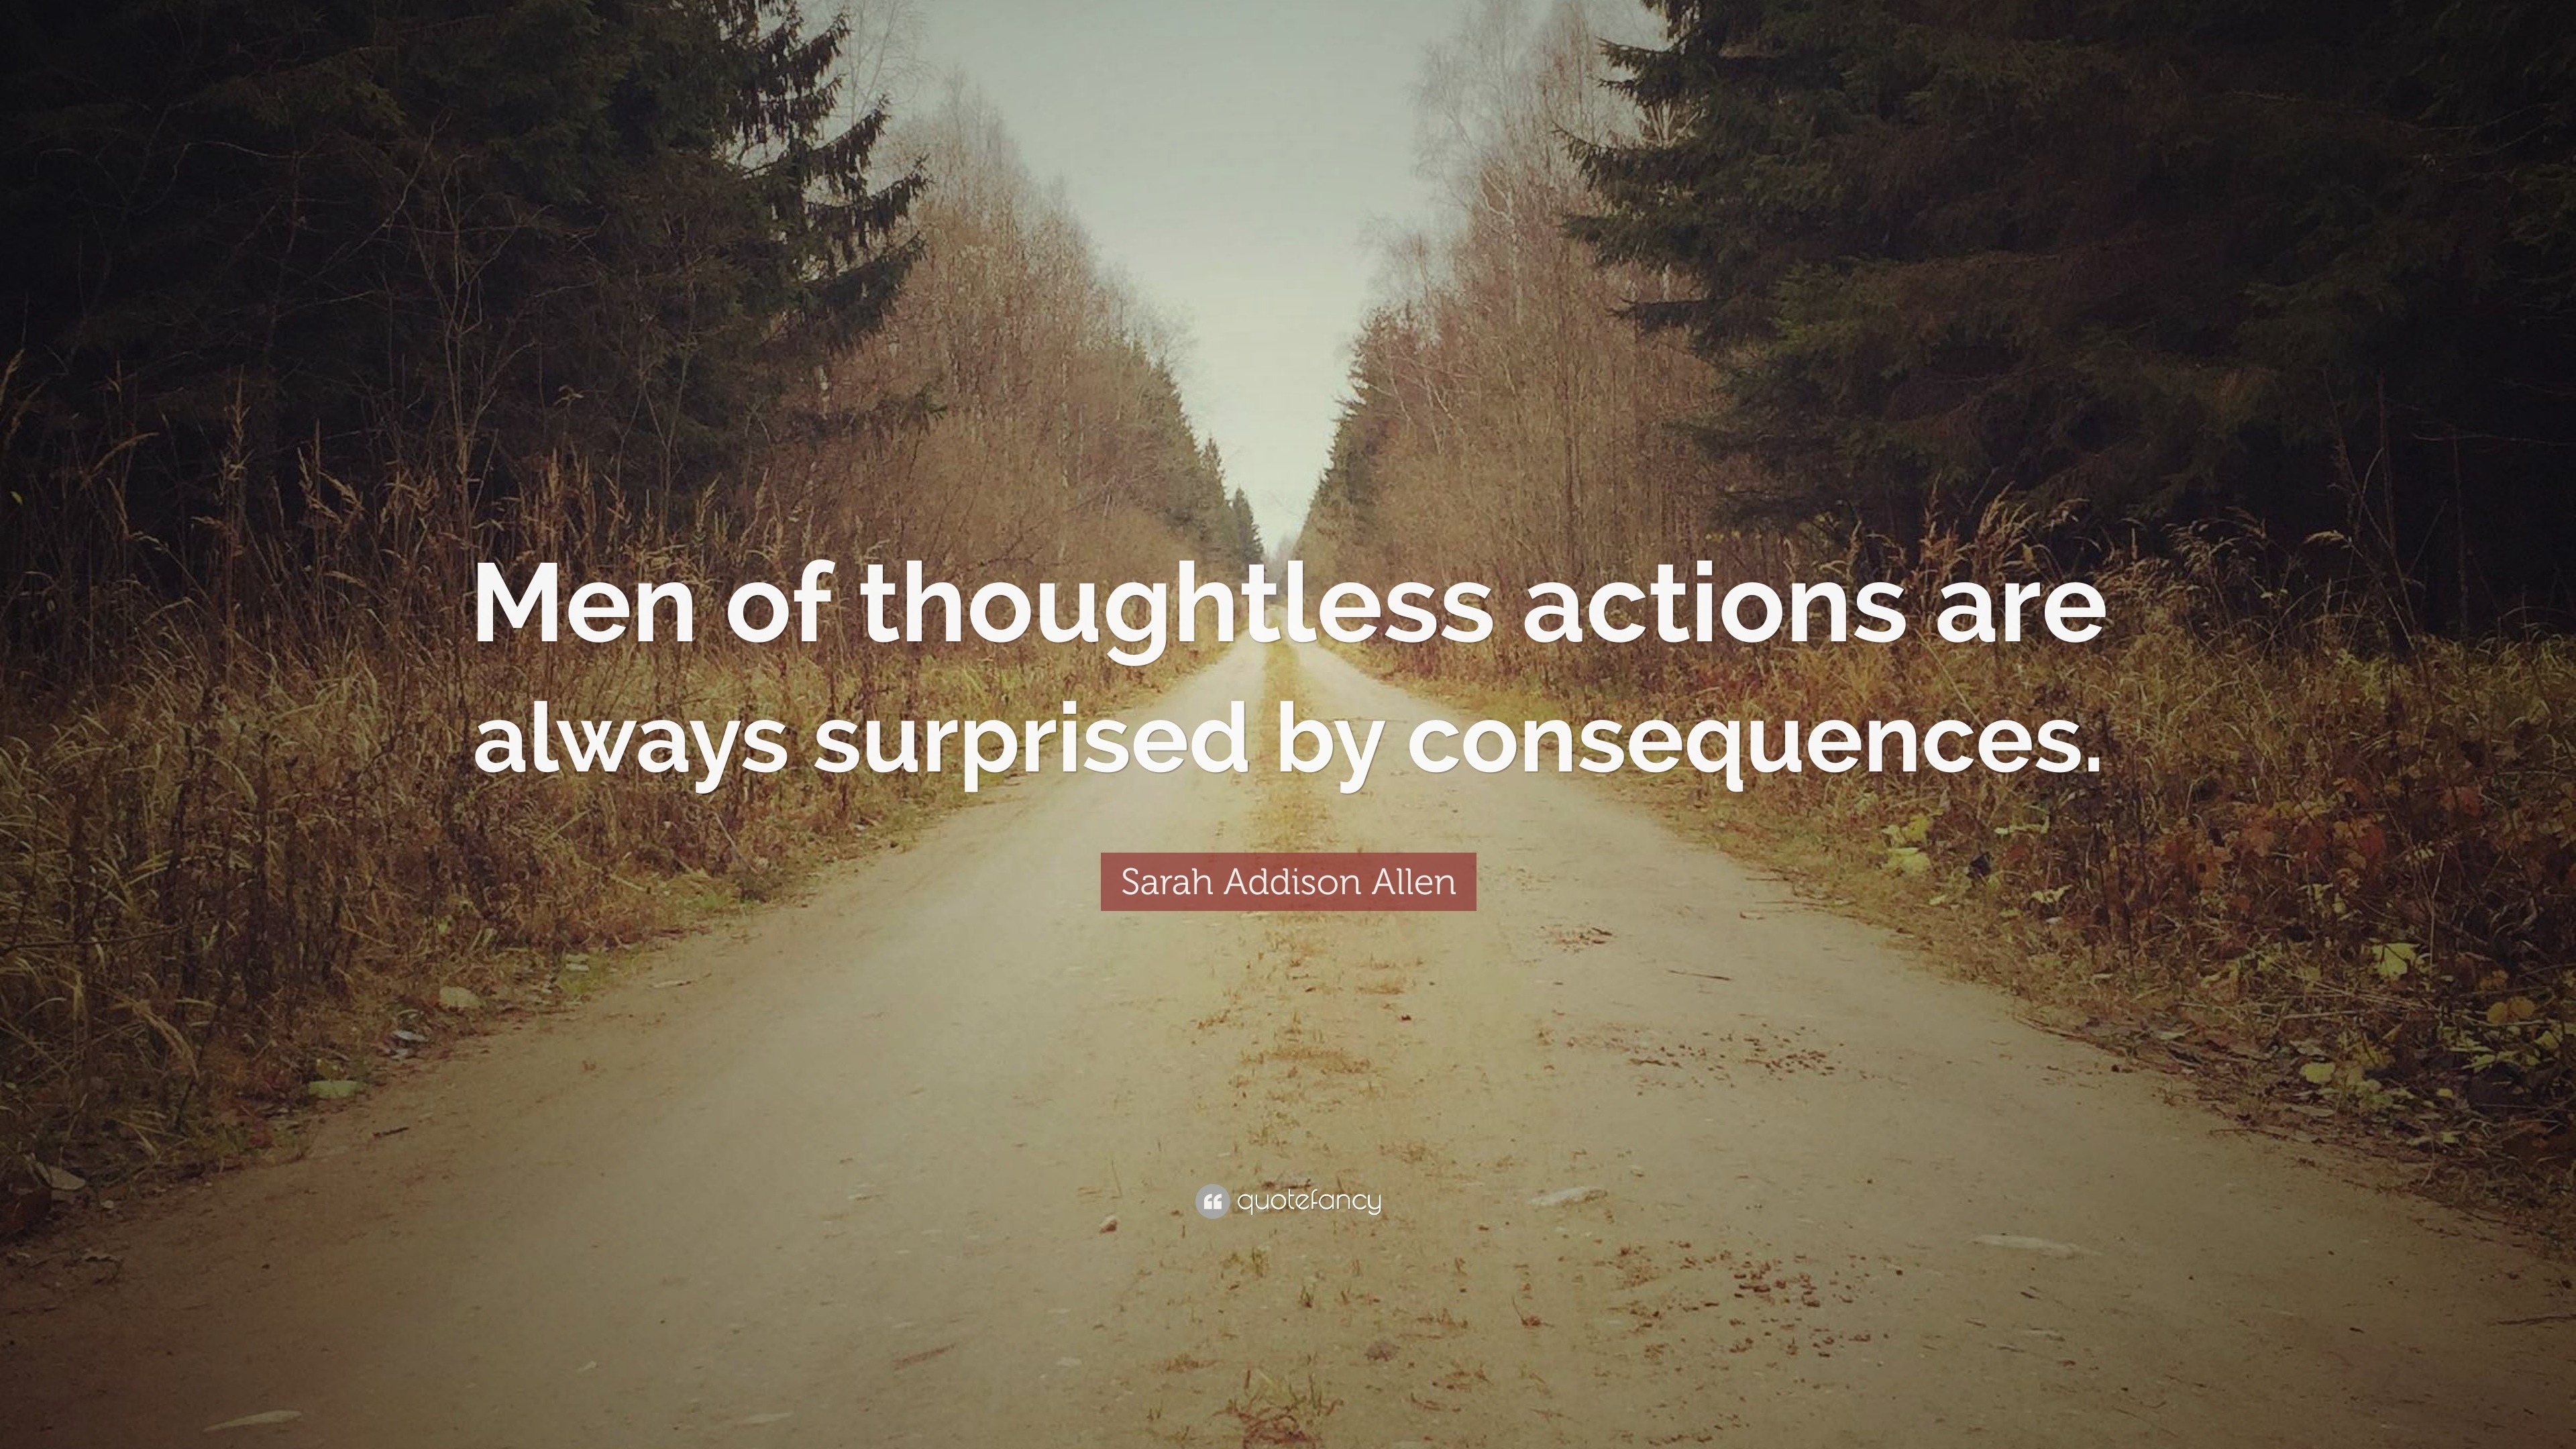 Sarah Addison Allen Quote “Men of thoughtless actions are